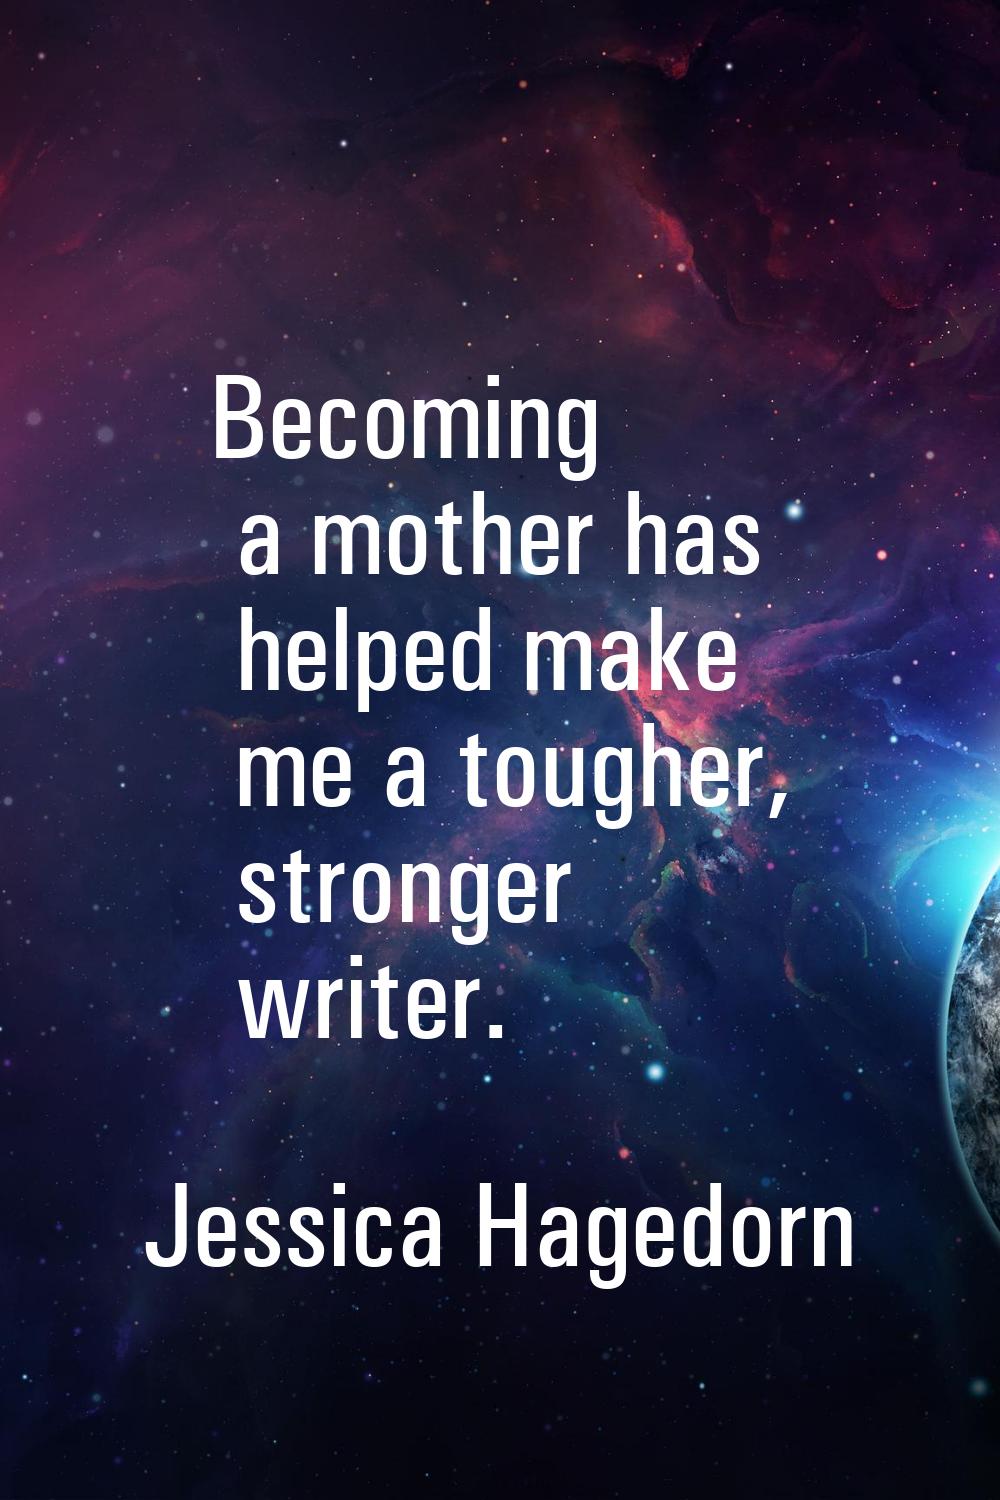 Becoming a mother has helped make me a tougher, stronger writer.